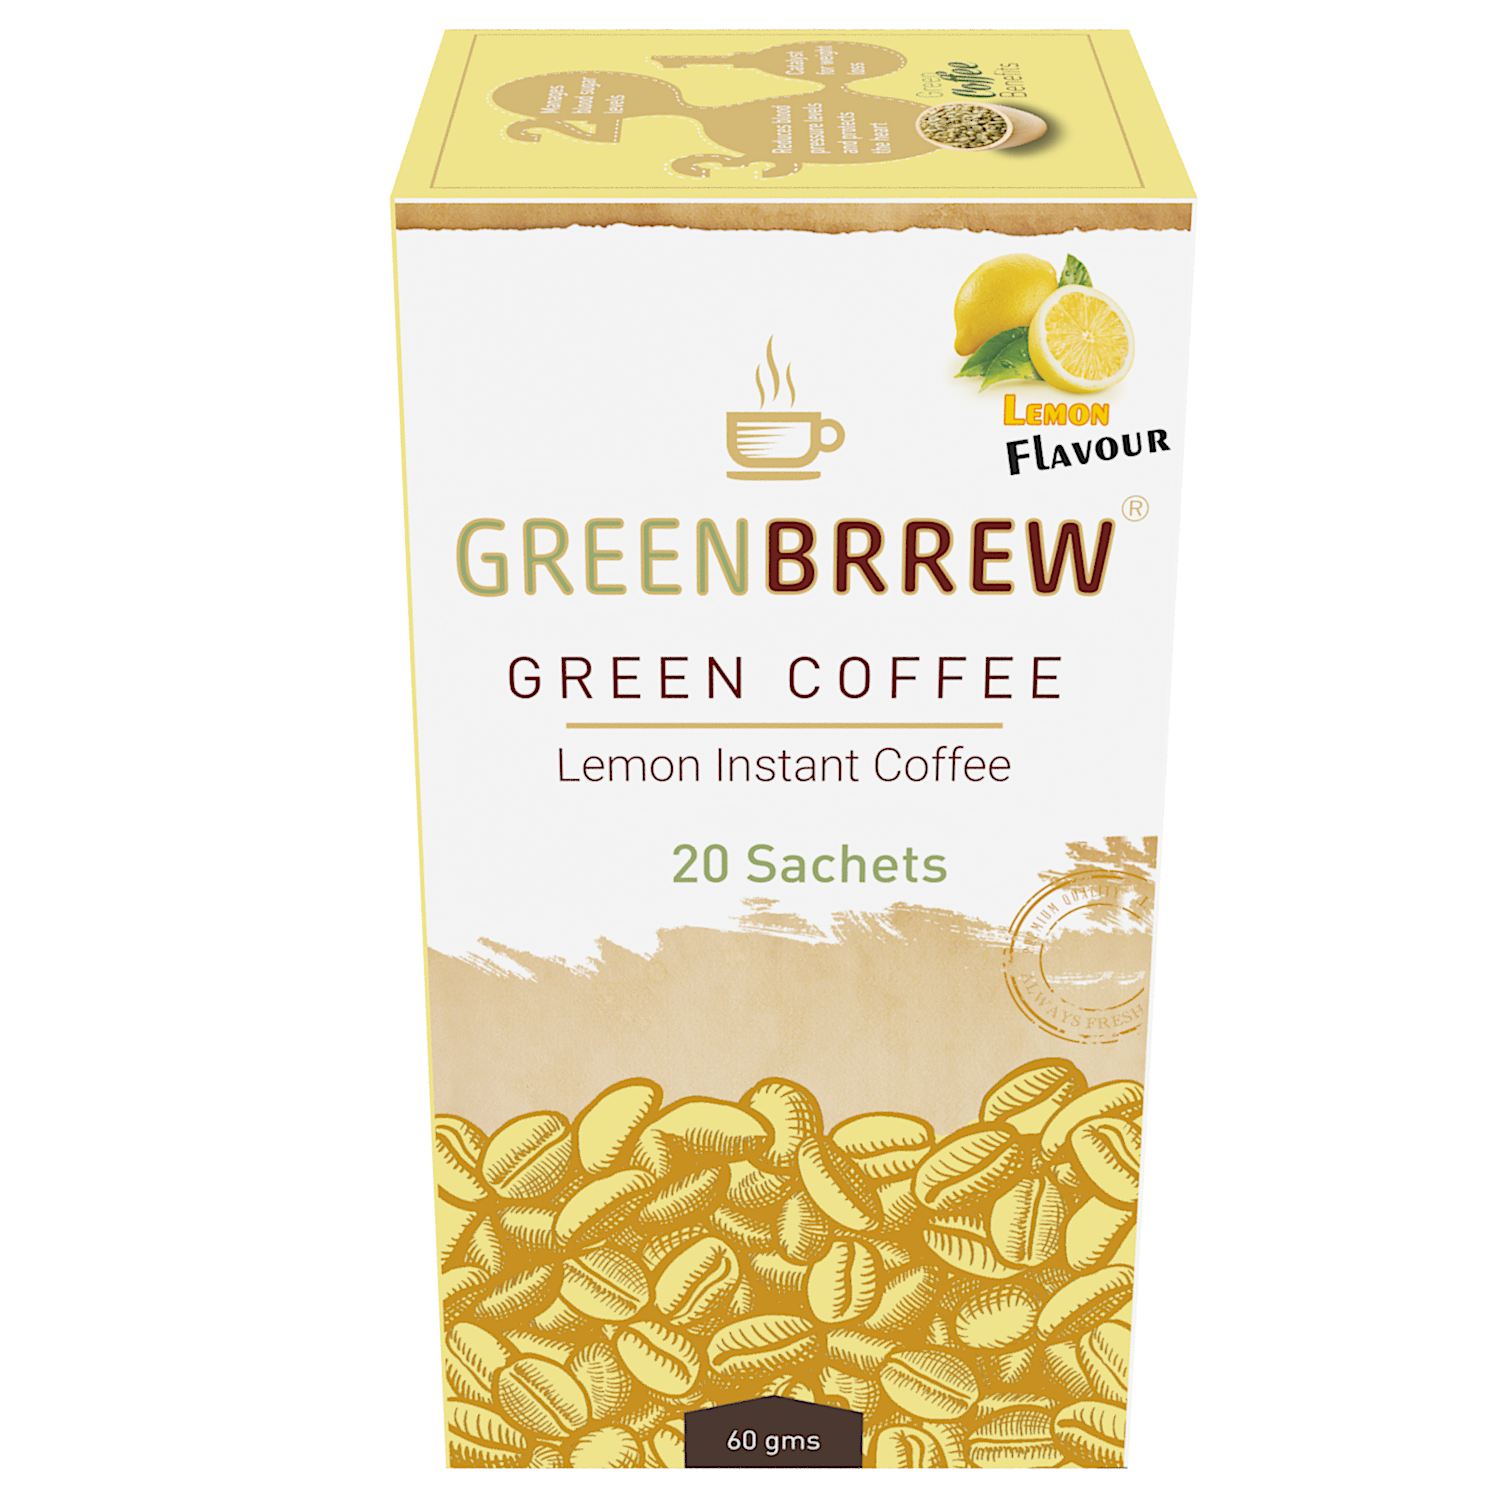 Greenbrrew Instant Green Coffee  Lemon Flavour  Weight Loss   20'sachets, 60g